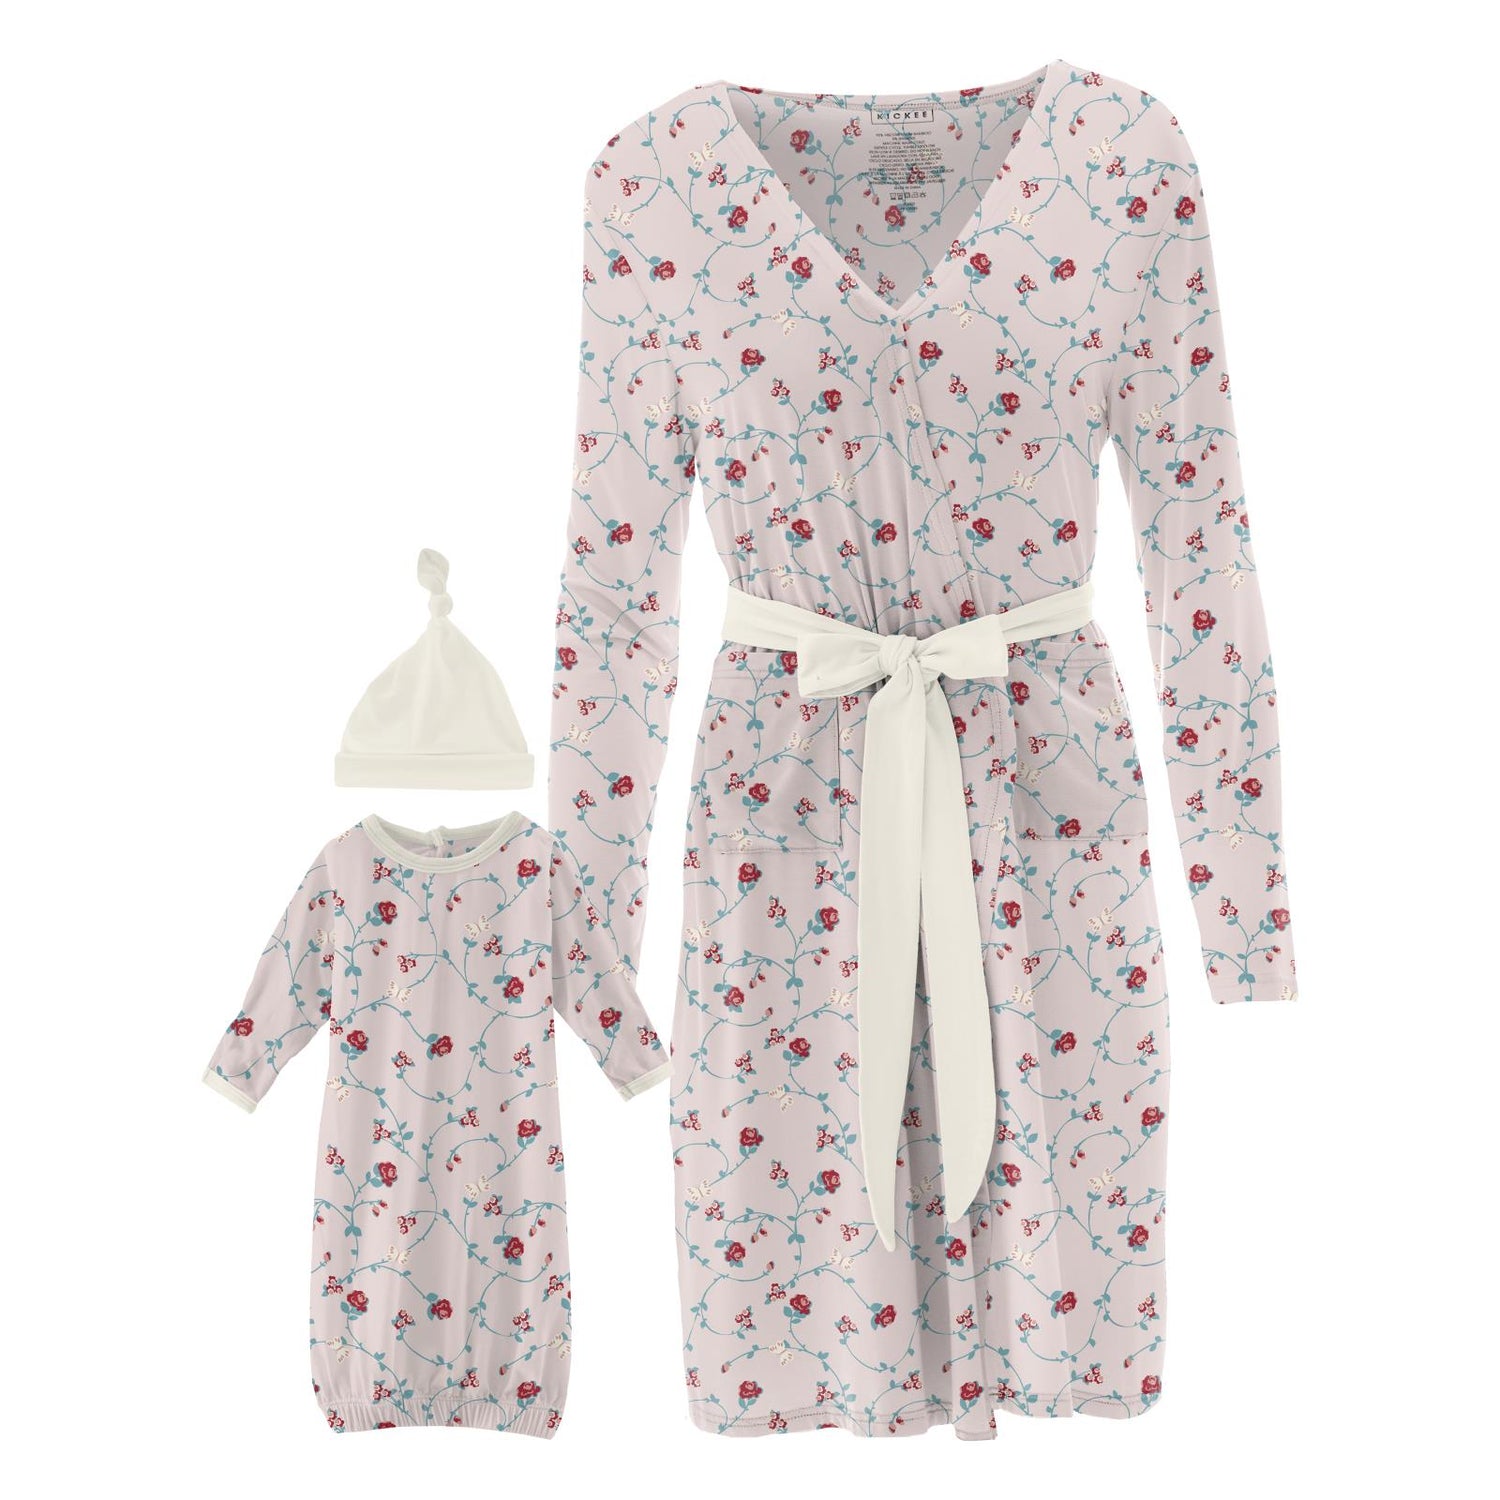 Women's Mid Length Lounge Robe & Layette Gown Set in Macaroon Floral Vines